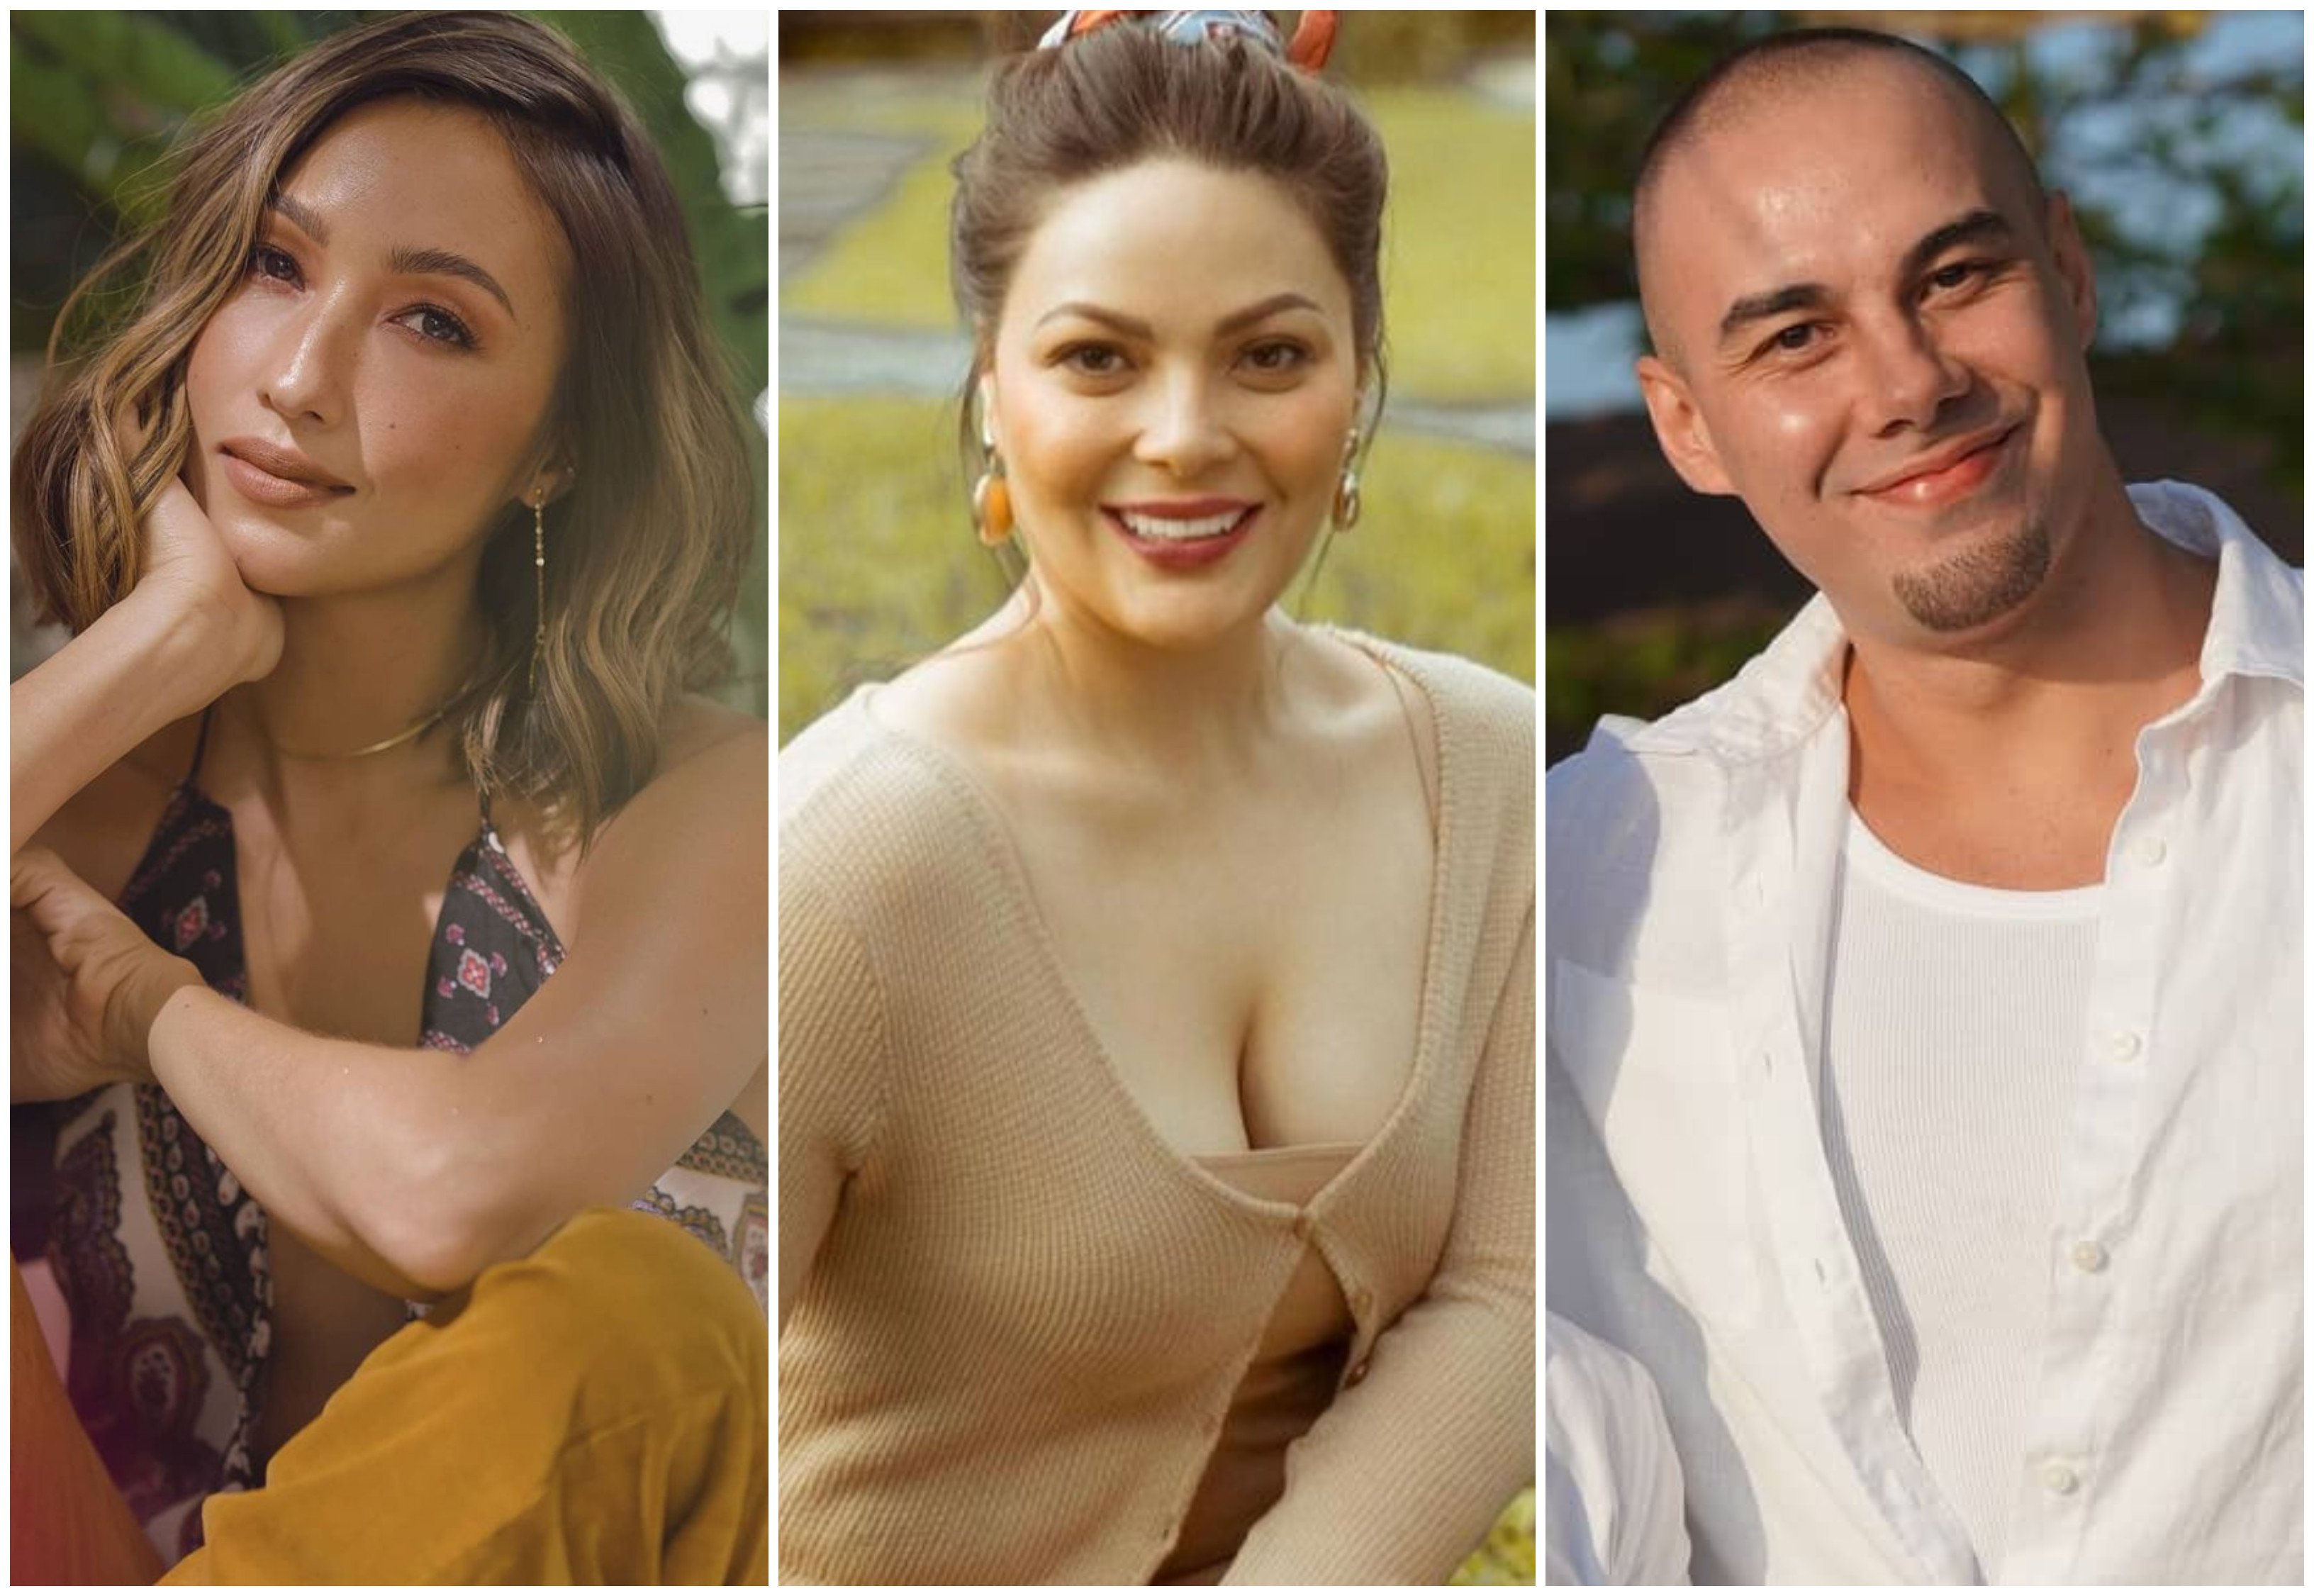 From left, Filipino A-listers Solenn Heussaff, Kristina “KC”  Concepcion and Doug Kramer, who all recently took a break in a luxury resort. Photos: @solenn; @kristinaconcepcion; @dougkramer/Instagram